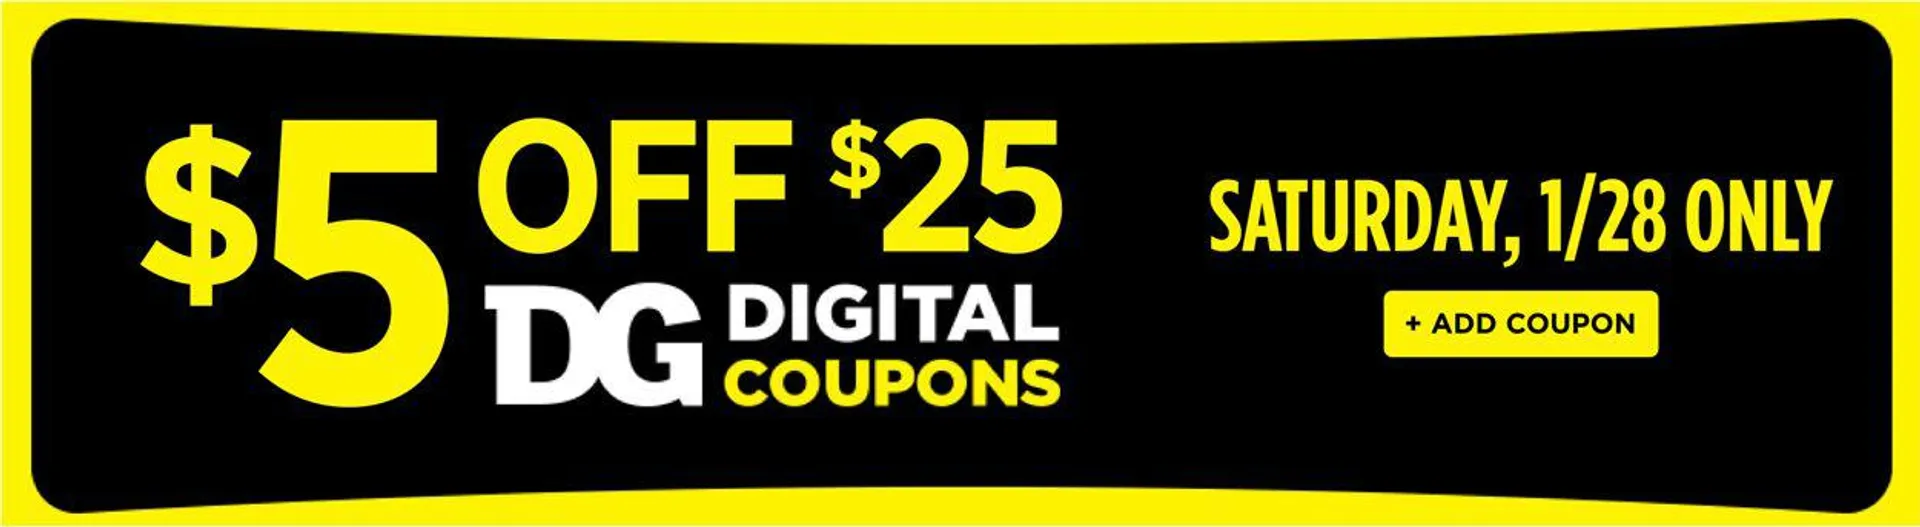 Dollar General Current weekly ad - 2